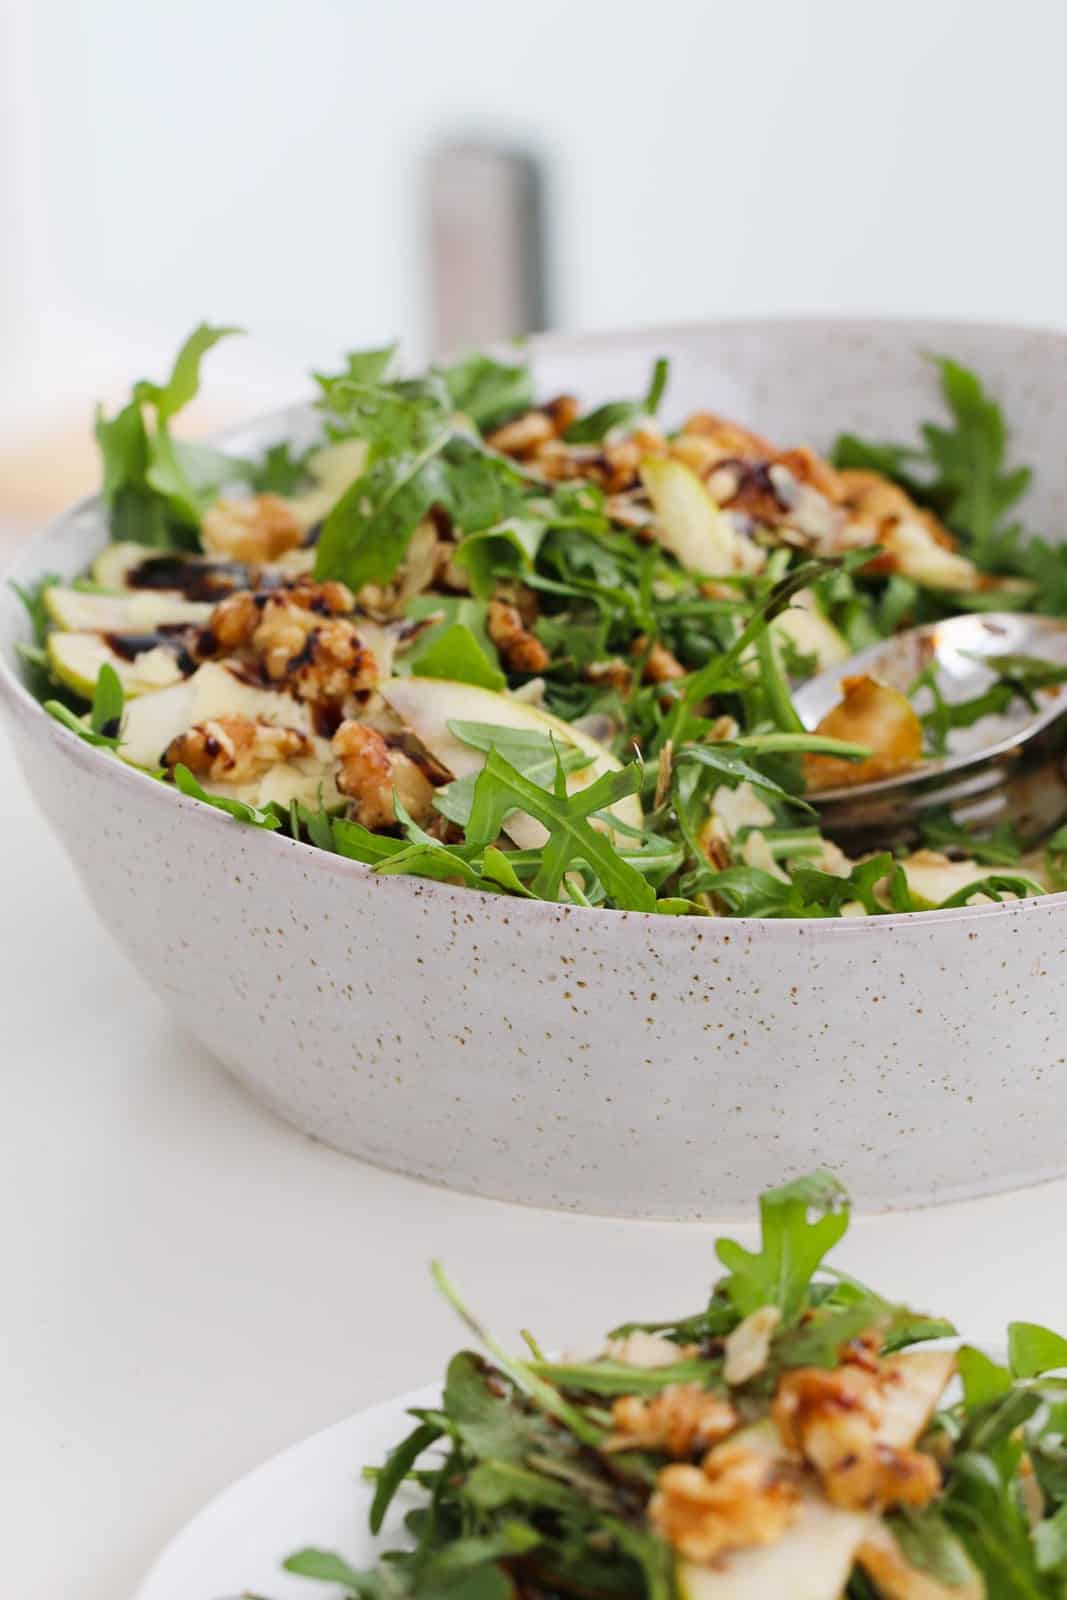 A bowl of fresh salad with walnuts, pear, rocket, parmesan and a balsamic glaze.